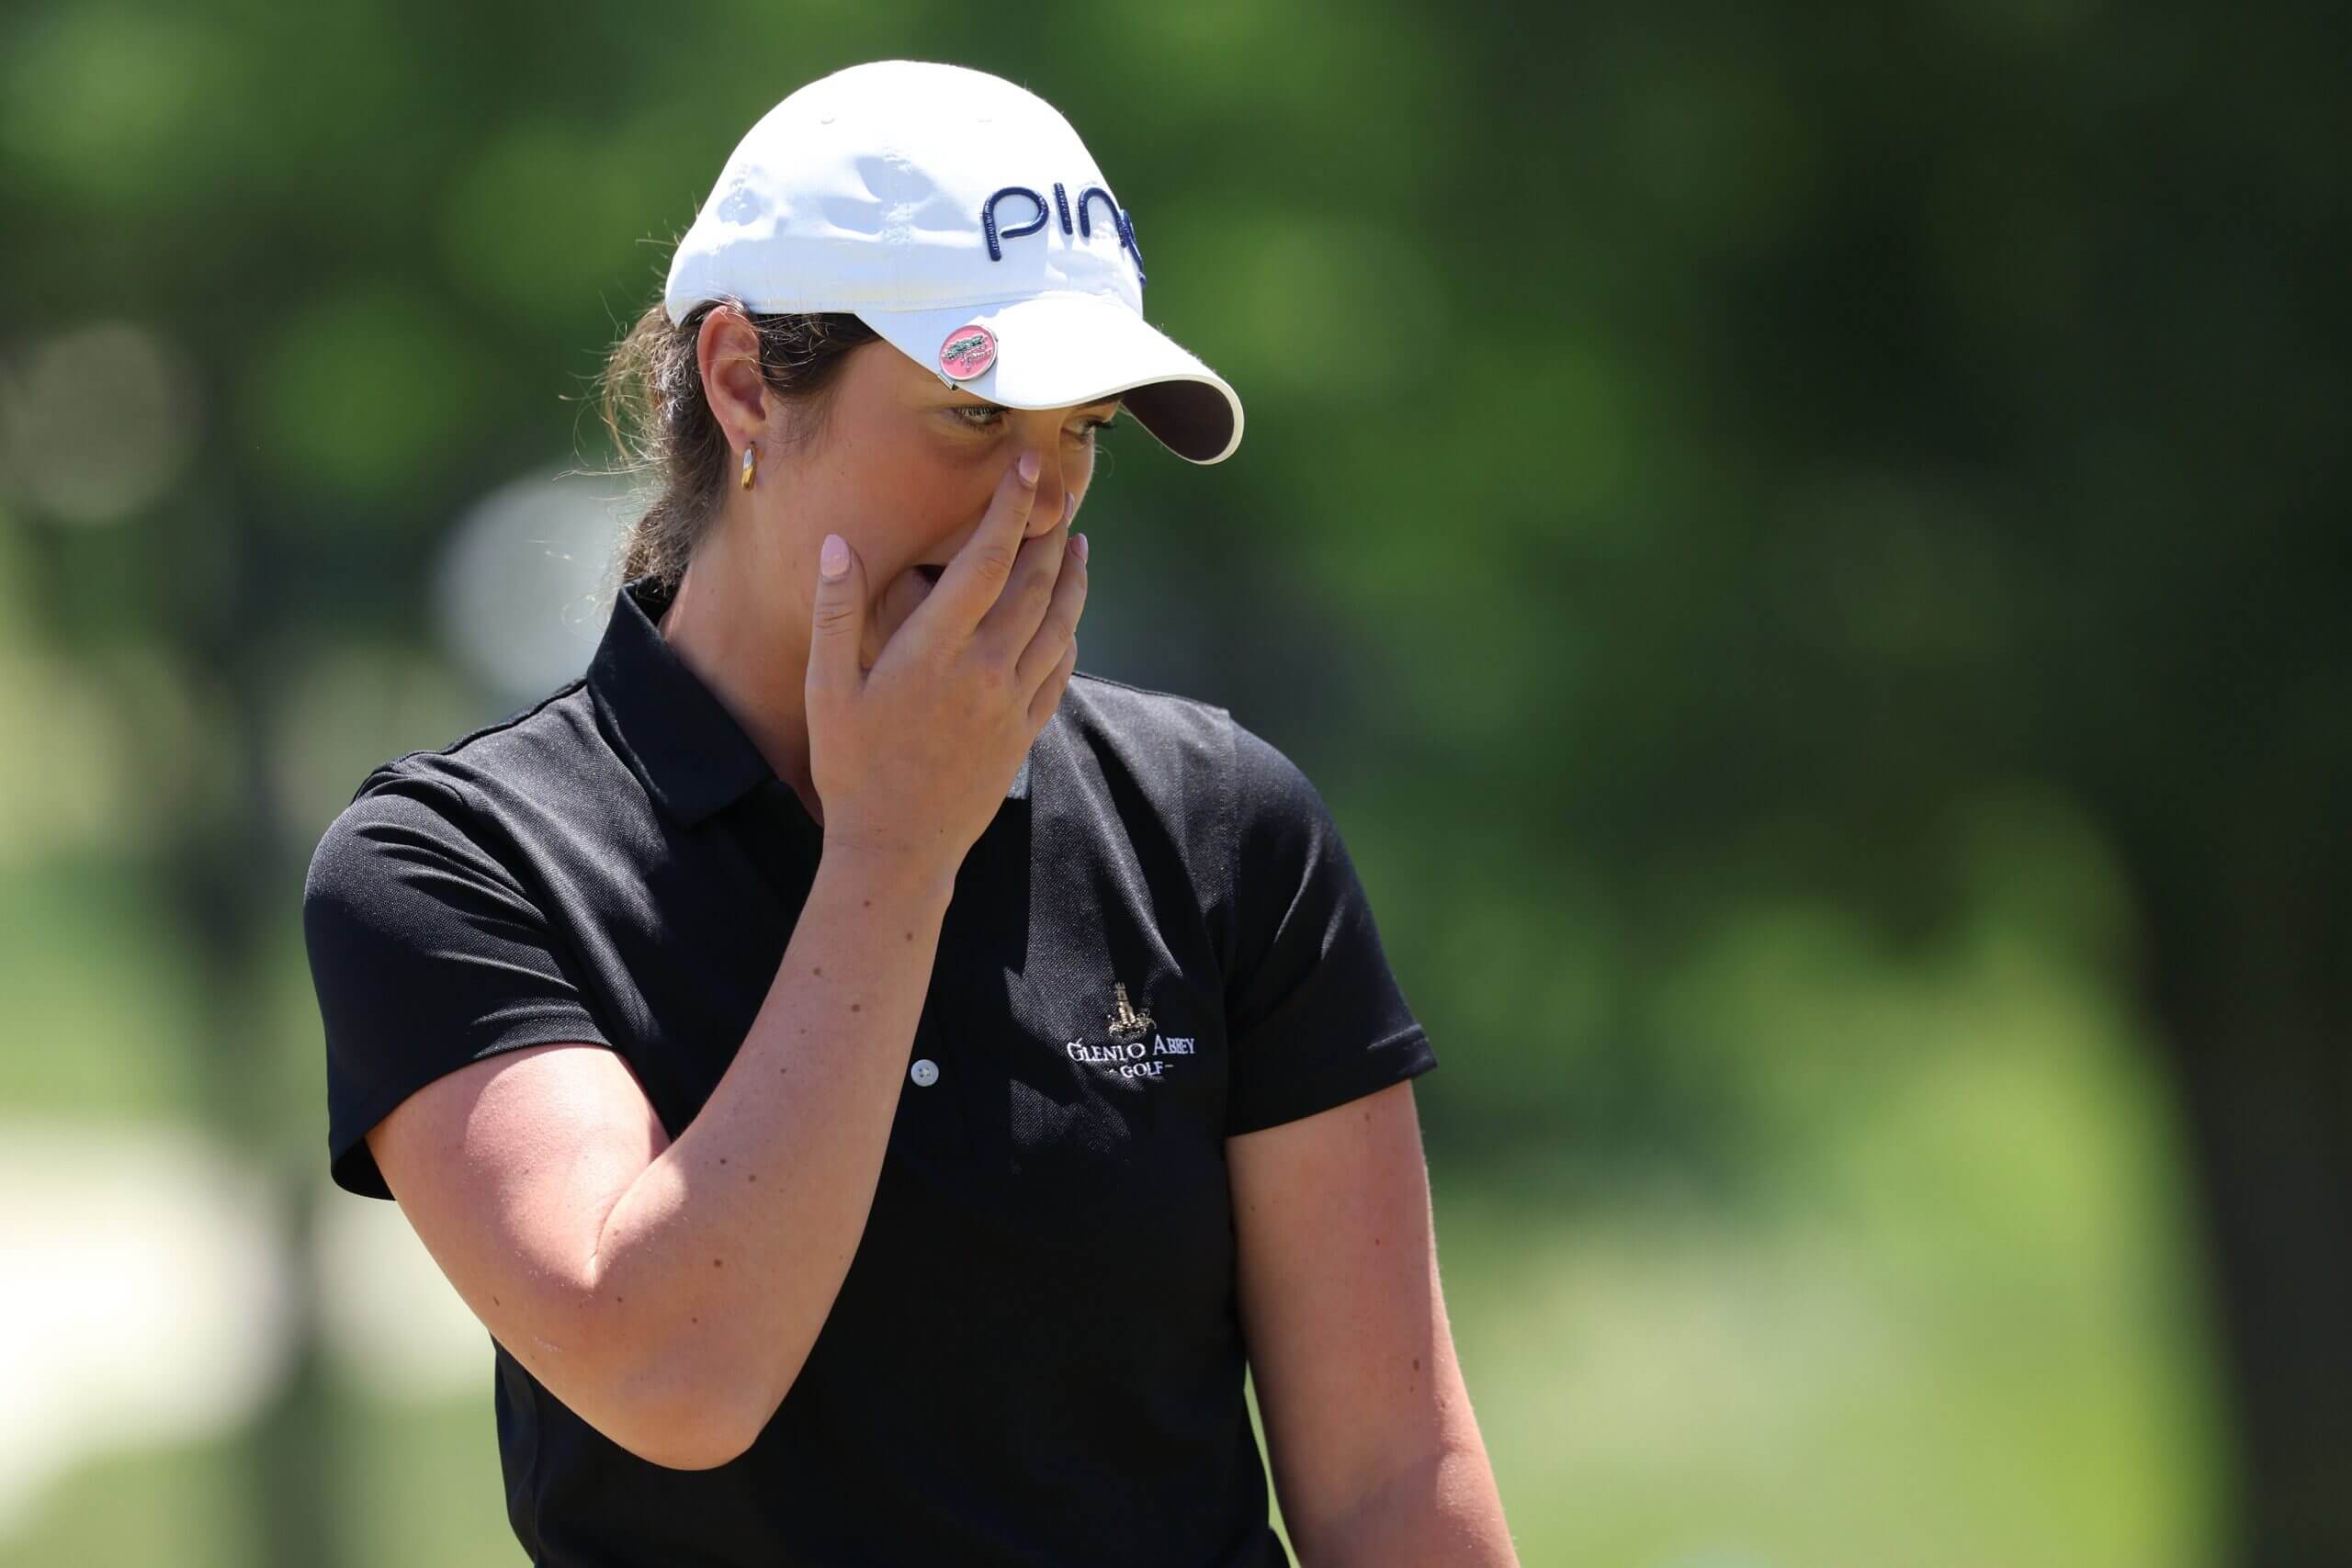 How this U.S. Women's Open became the massacre at Lancaster